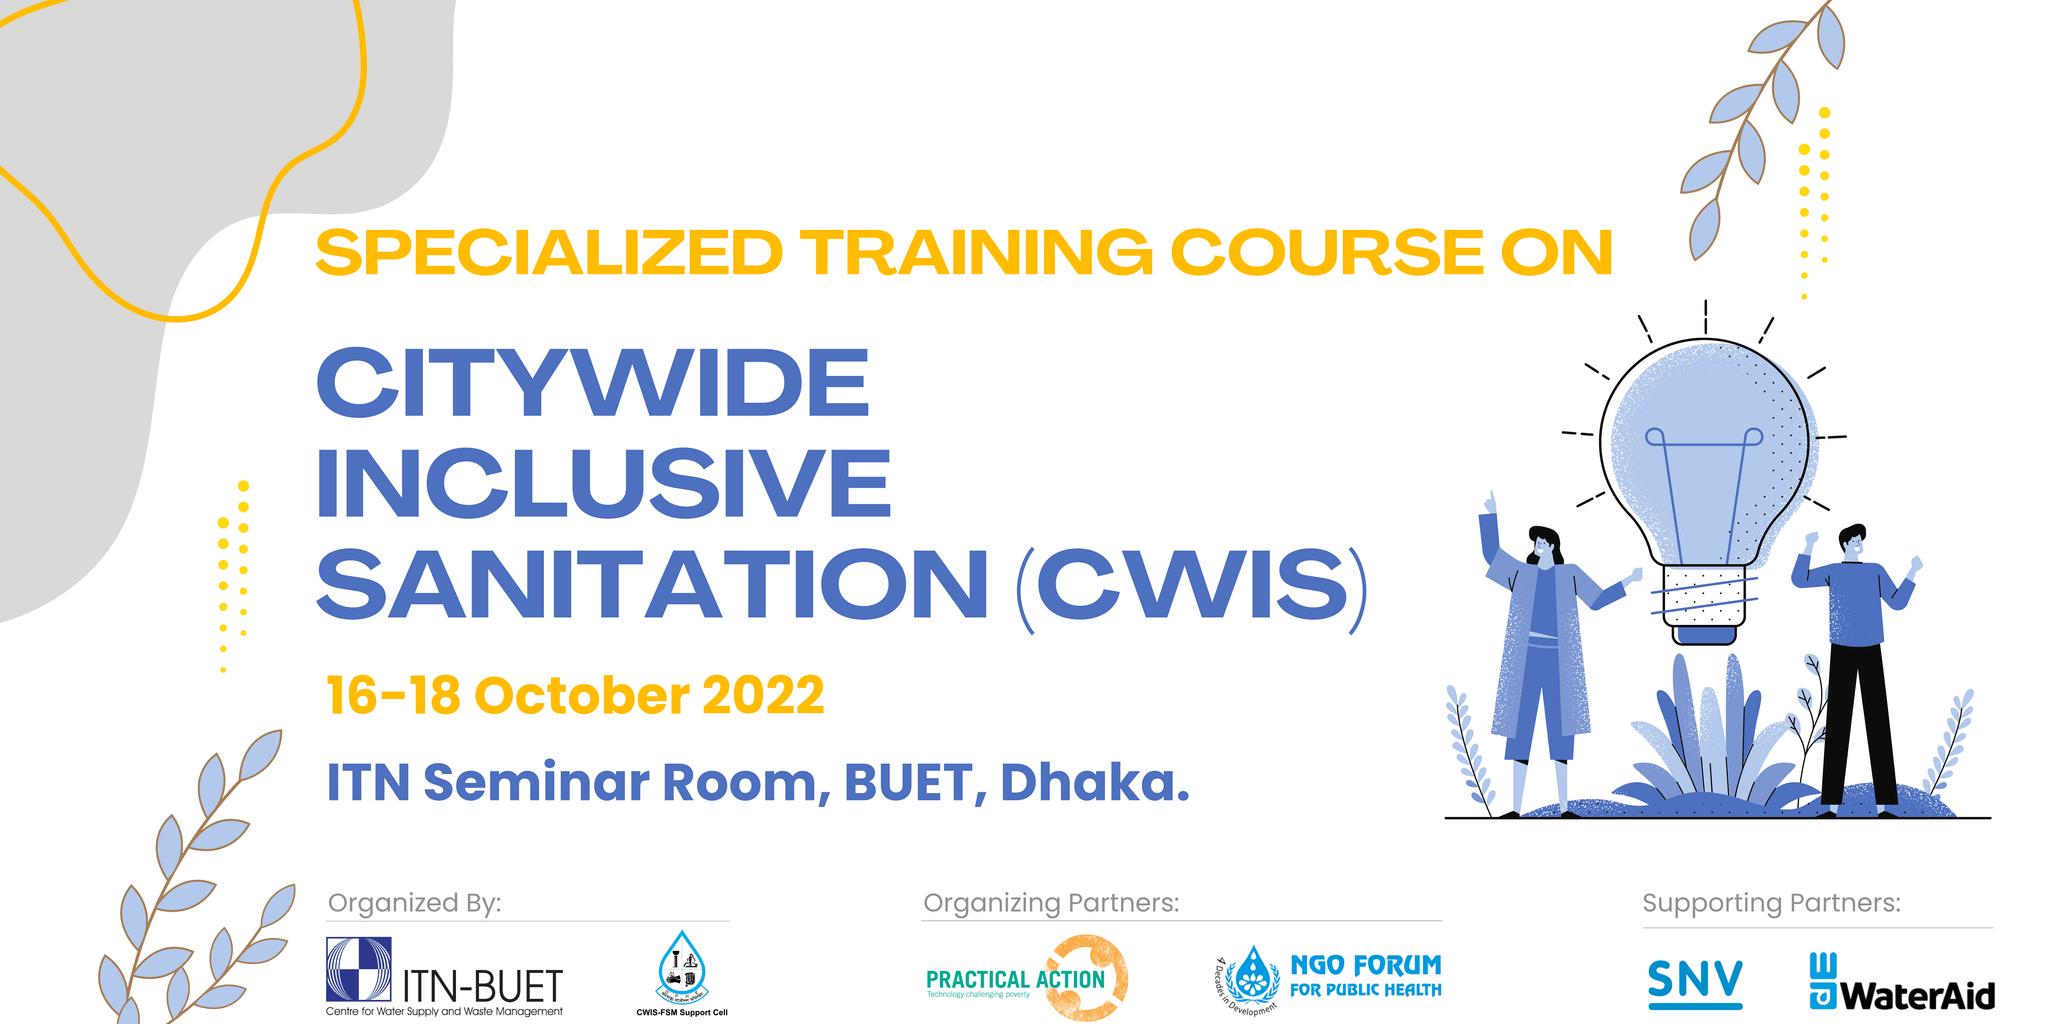 Specialized Training Course on City Wide Inclusive Sanitation (CWIS)